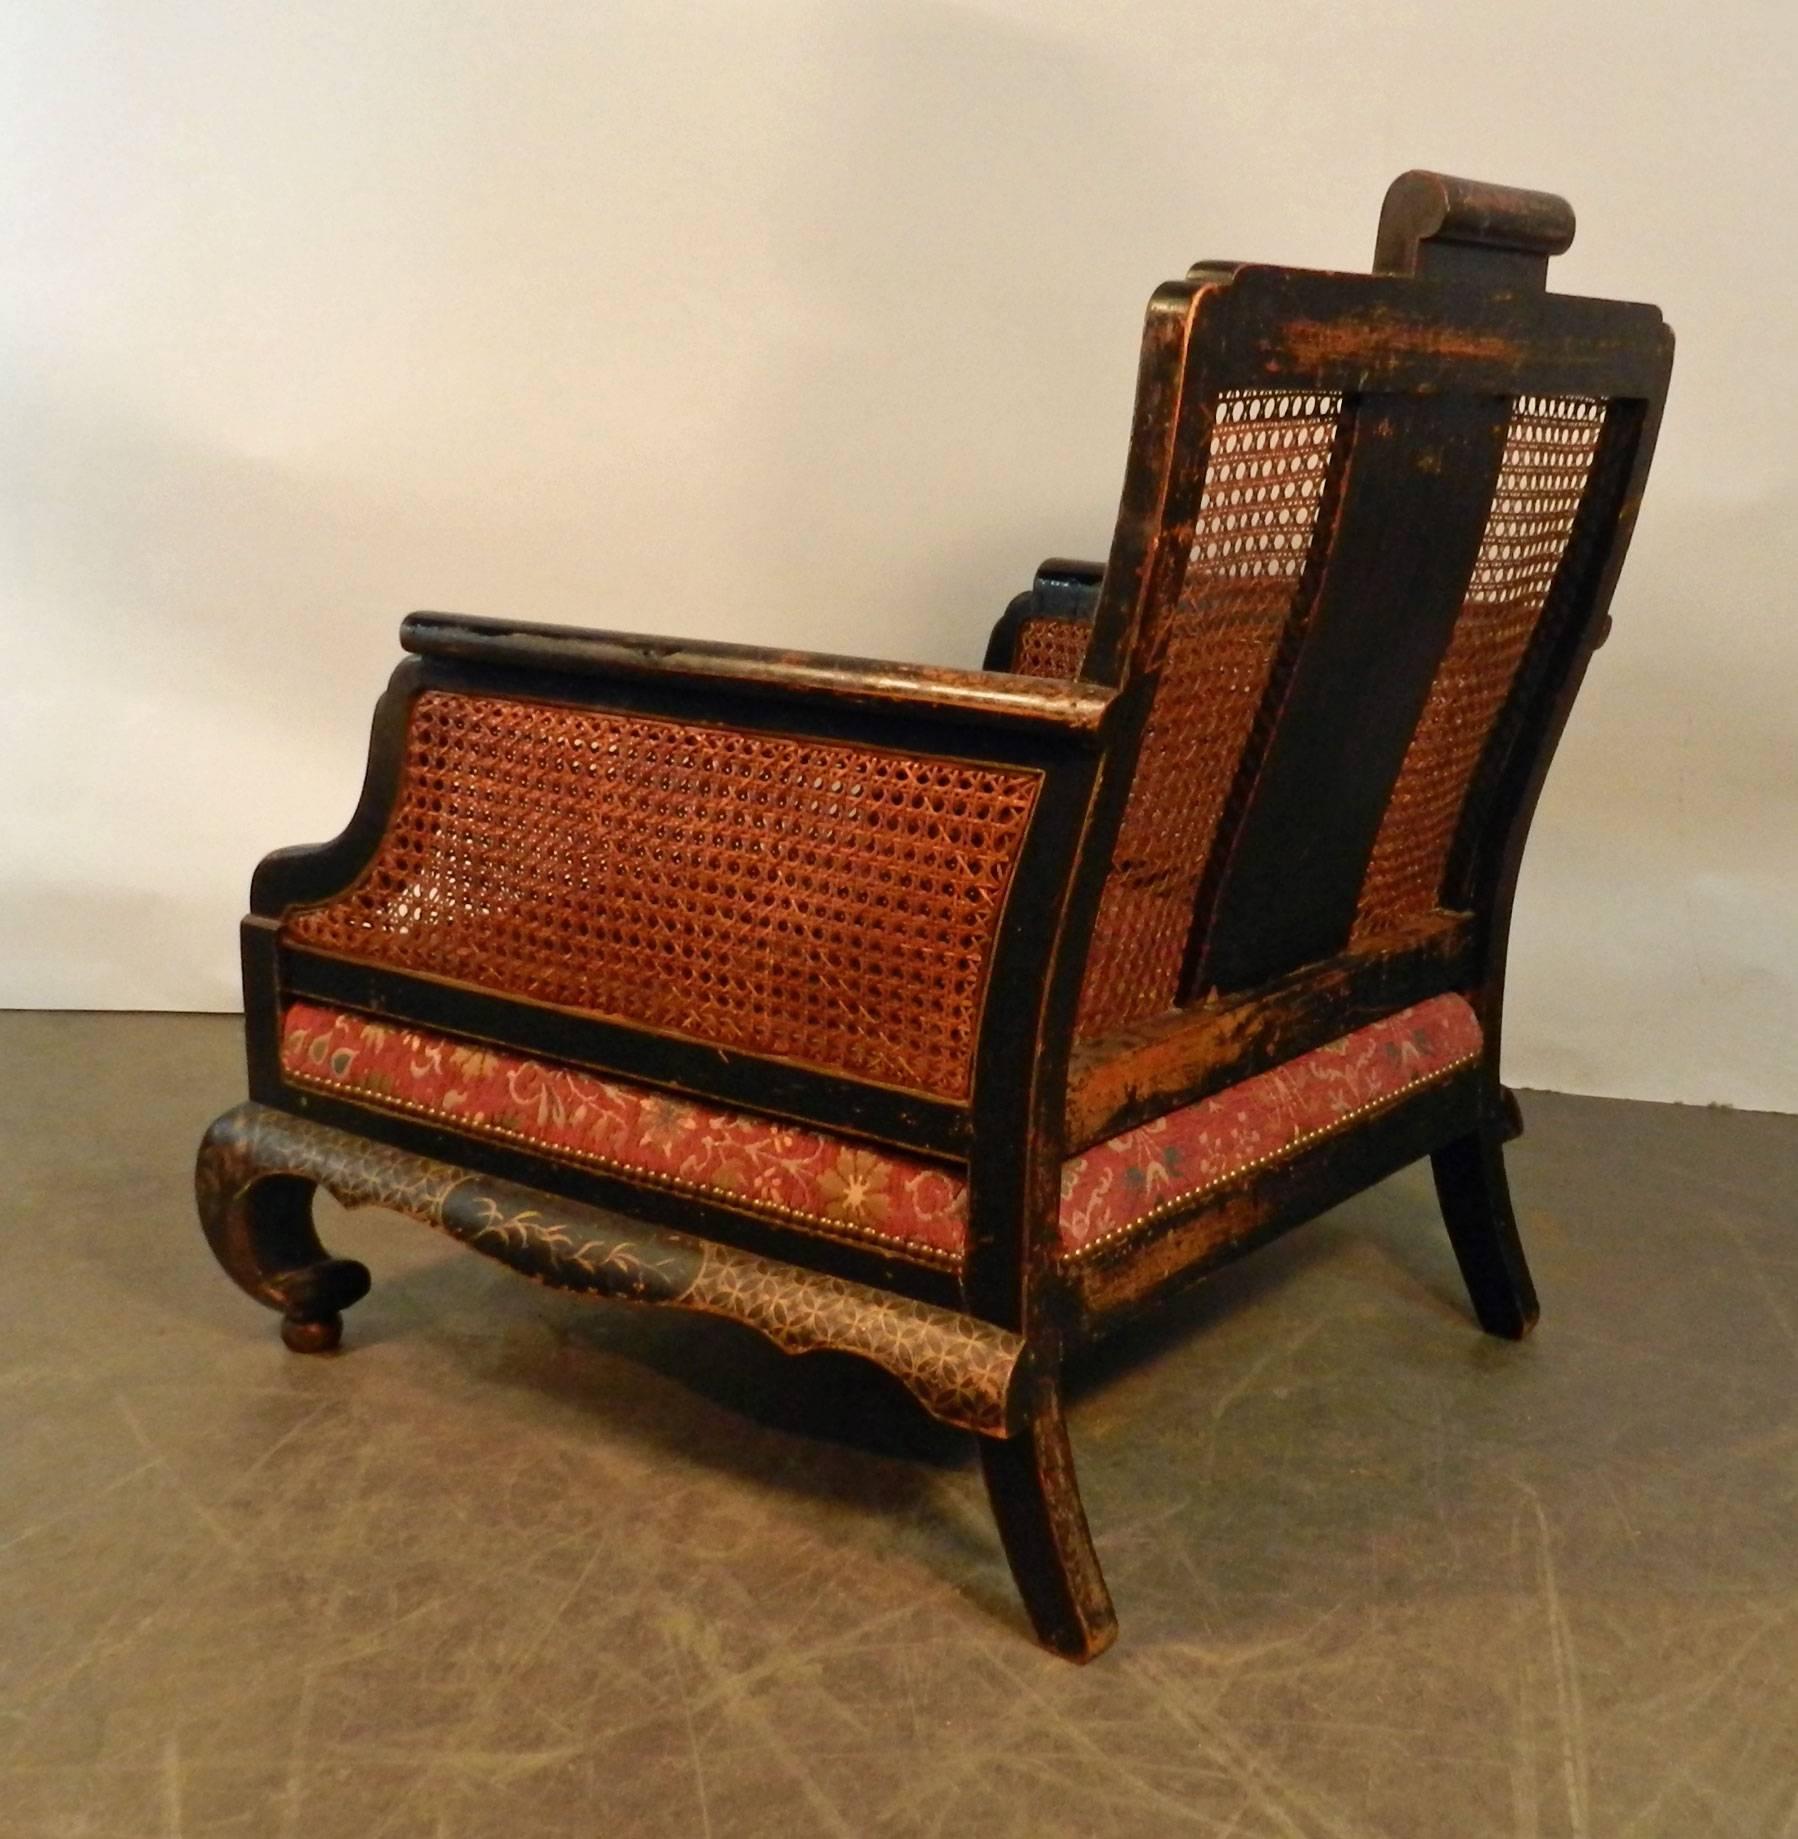 Chinese Pair of Lacquered Wood Armchairs, China, 19th Century